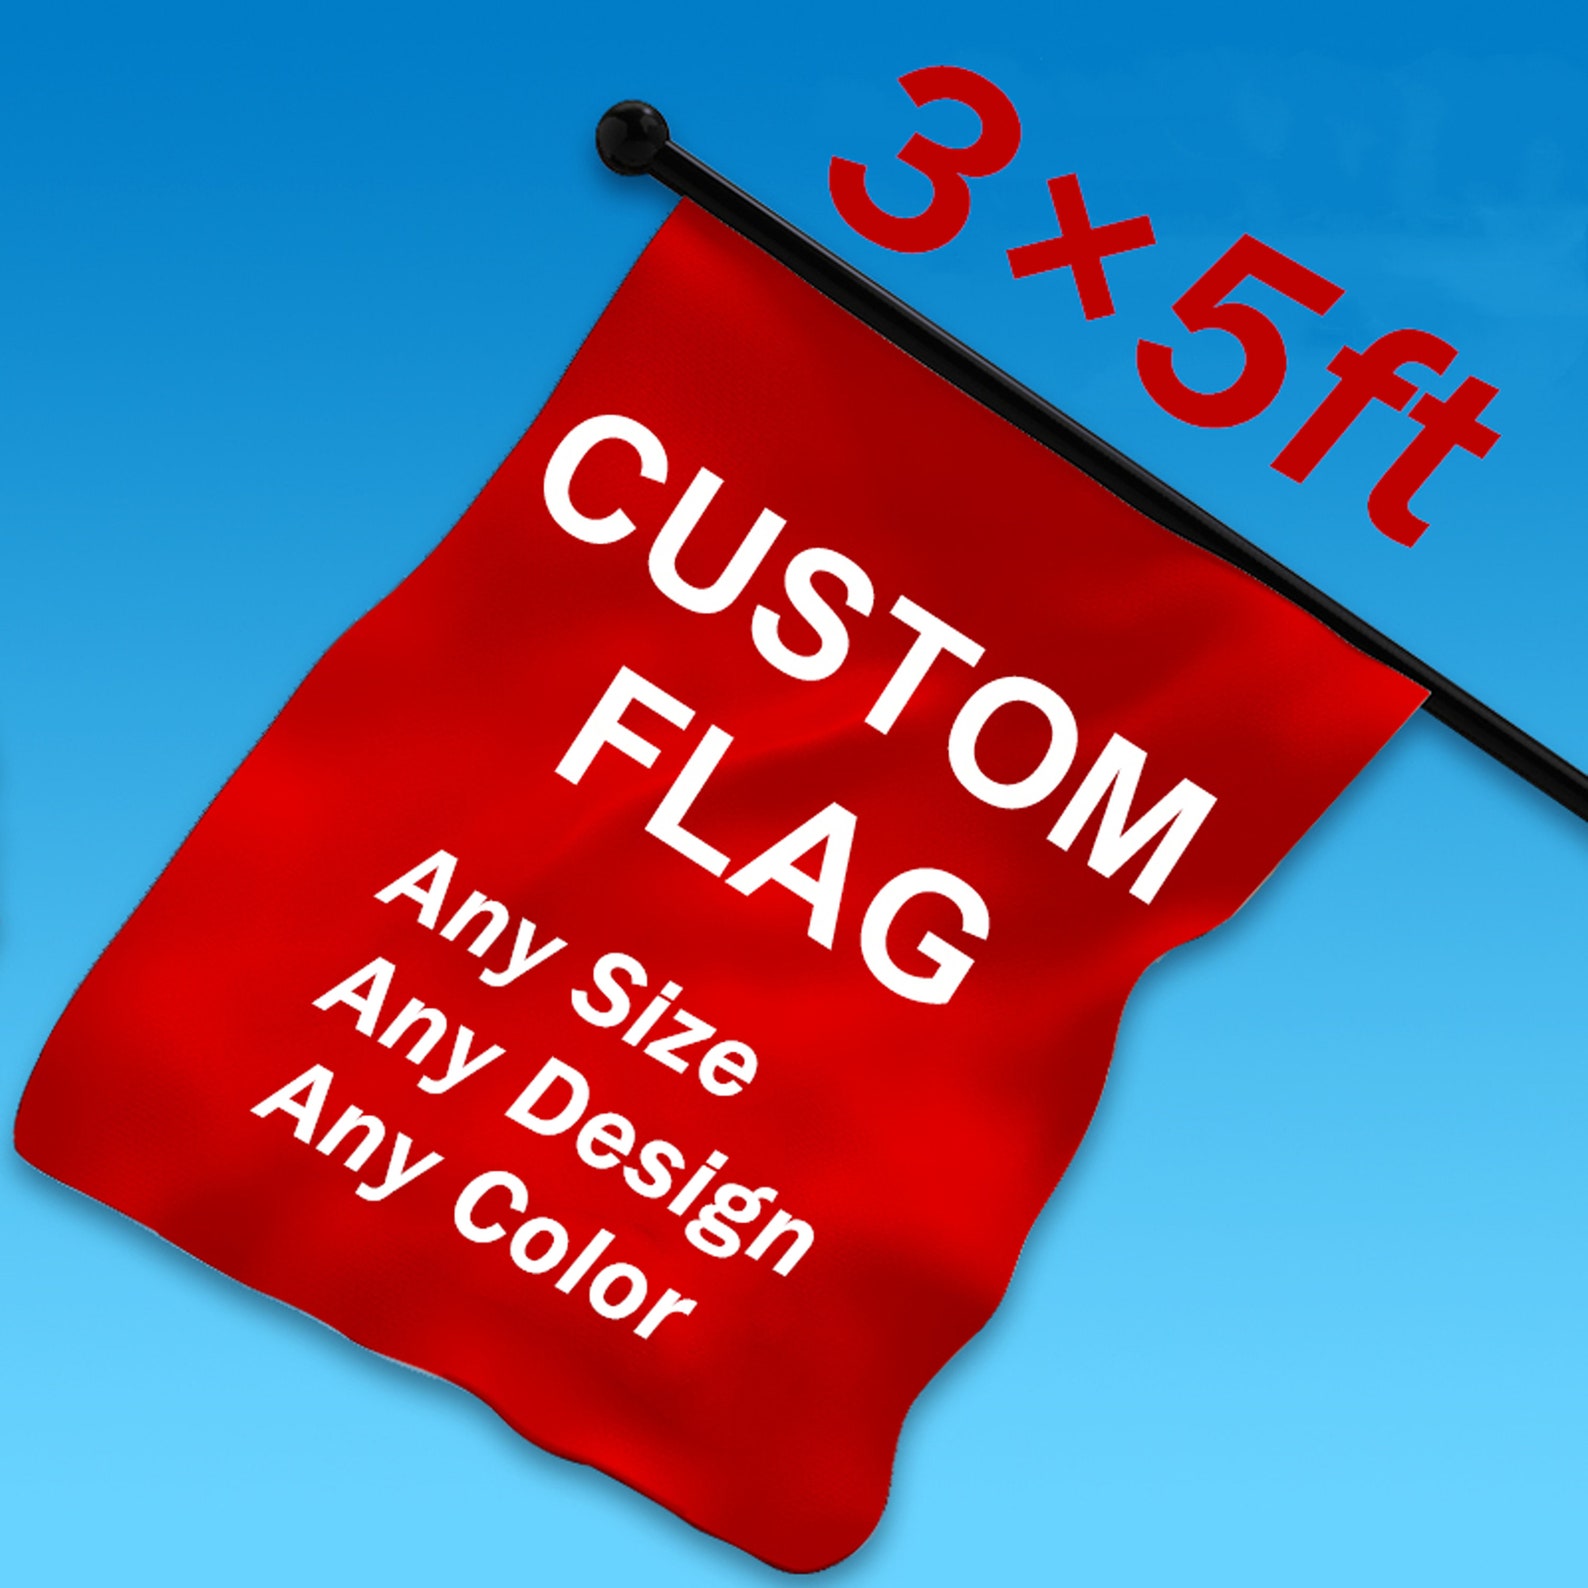 Custom Flag Printing Any Size 3x5 Ft Customized Flags Banner Etsy